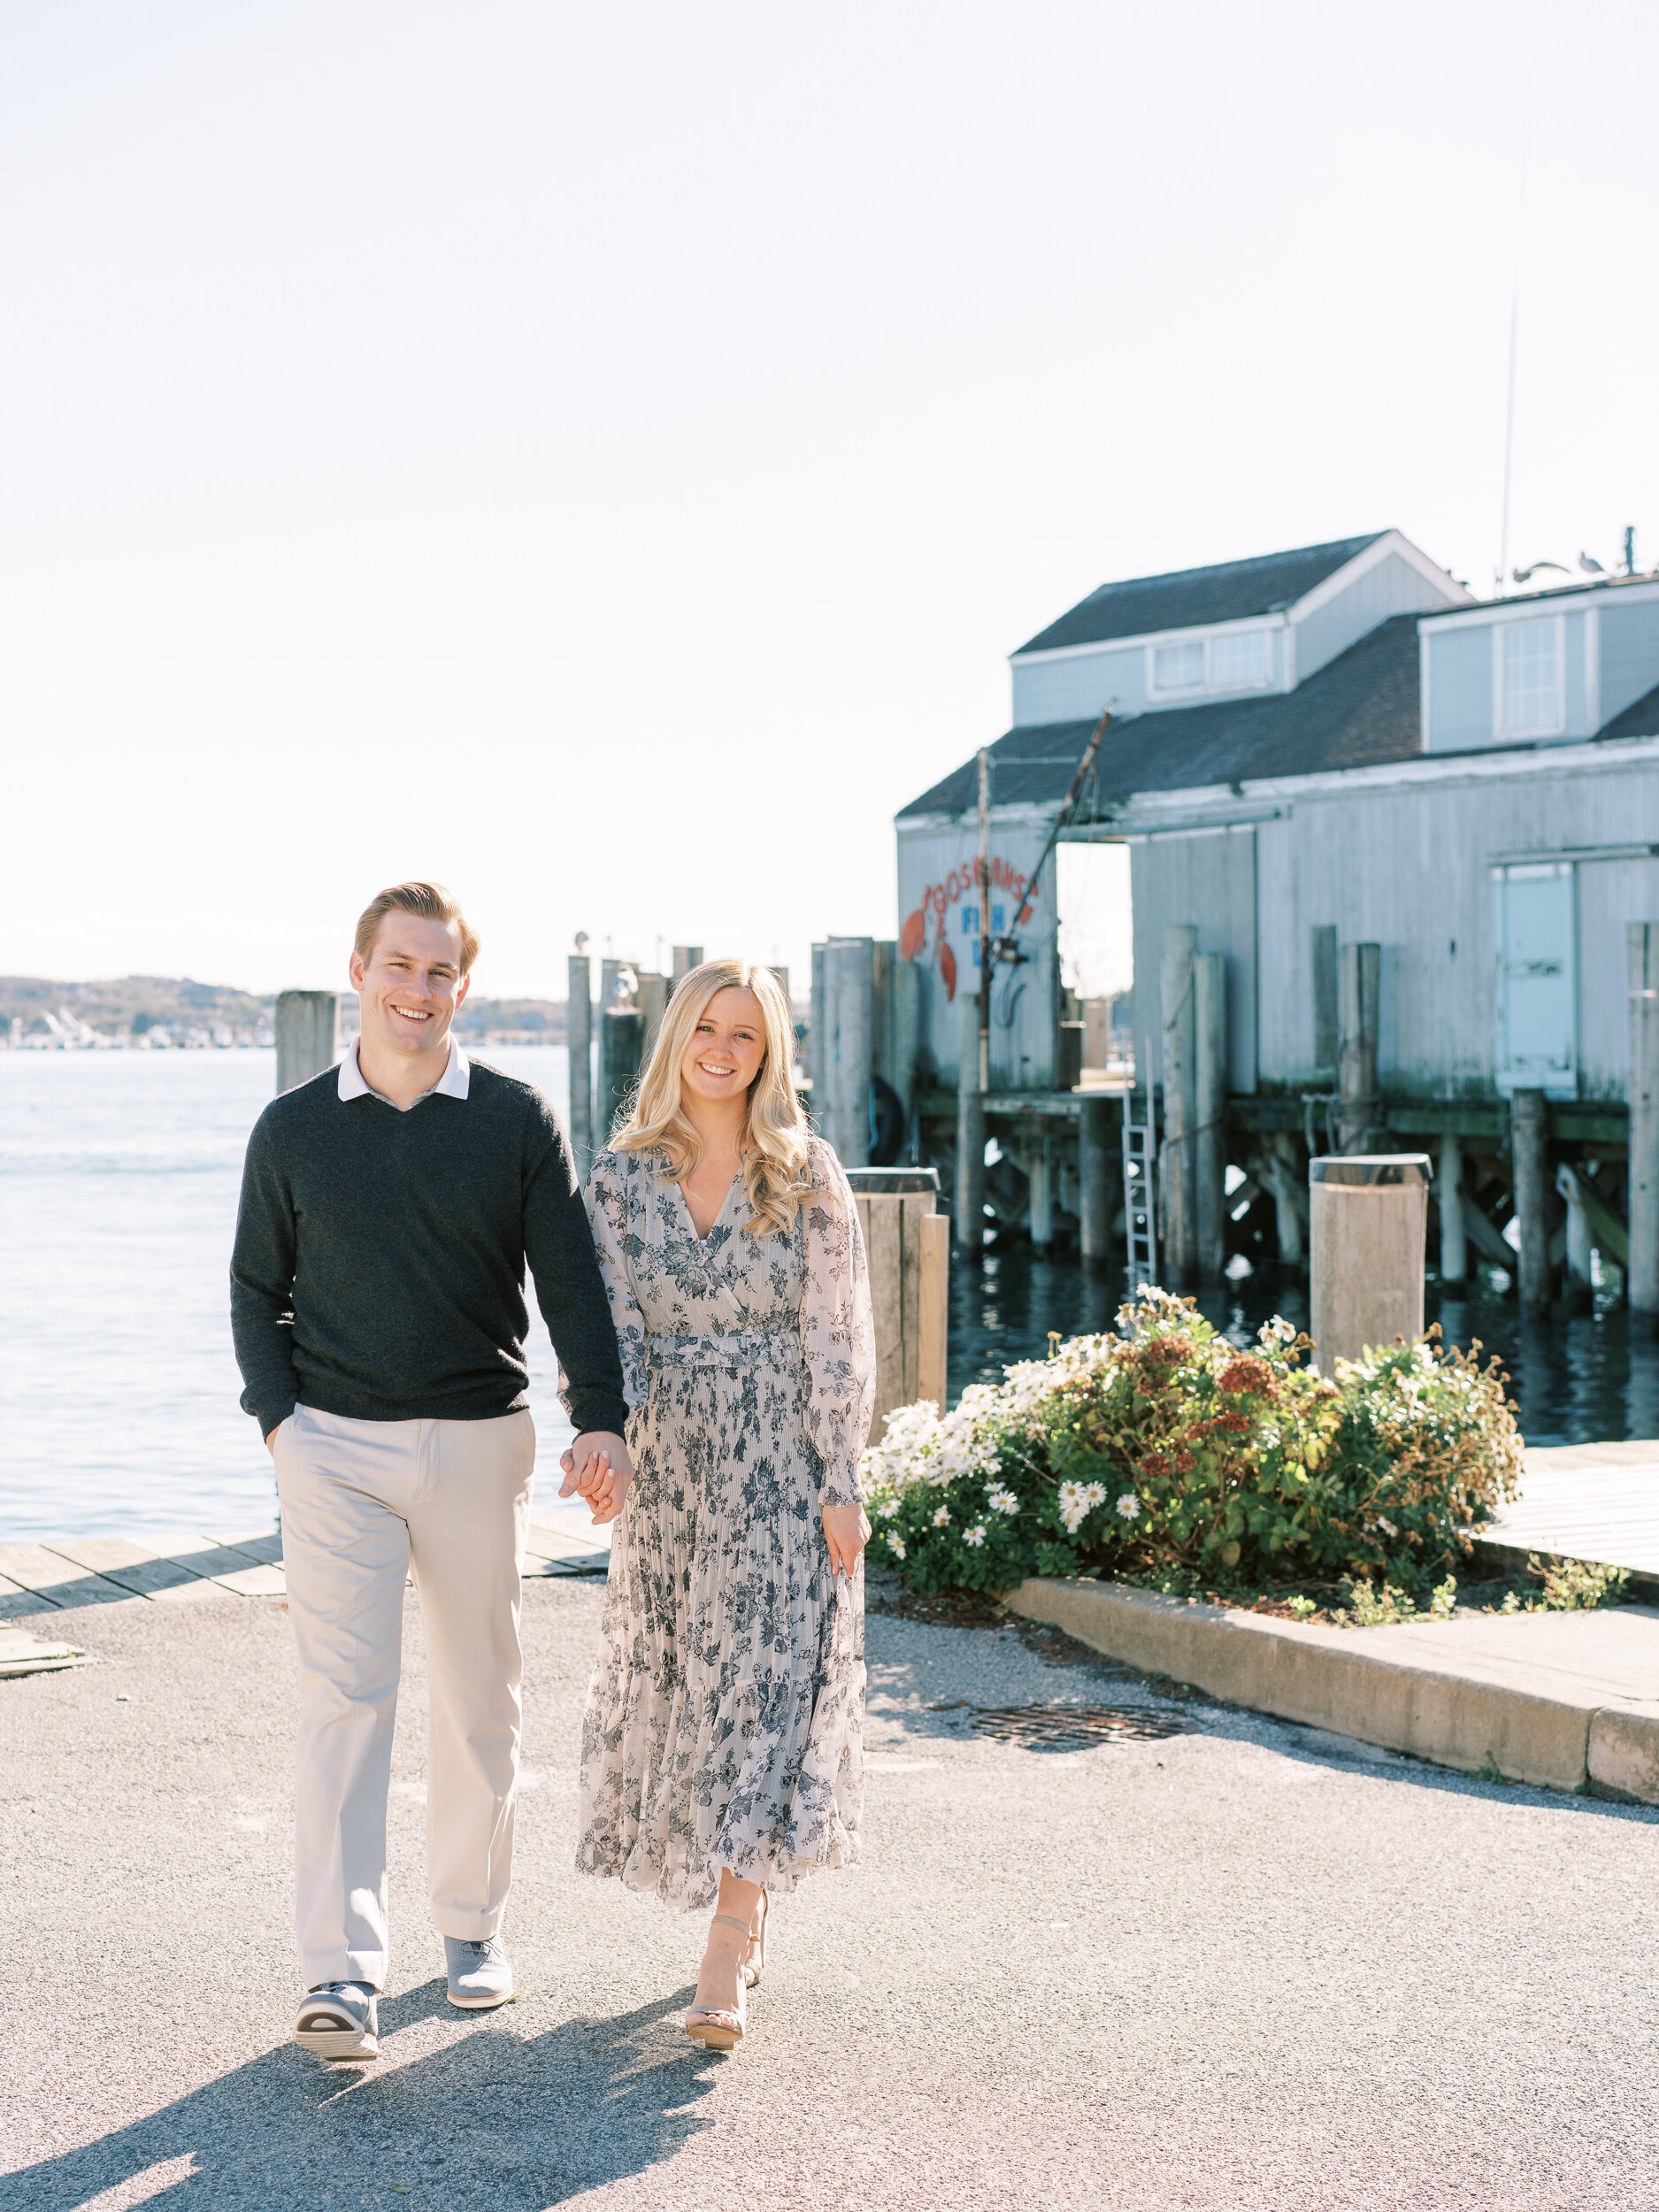 Engagement Session in Montauk, NY